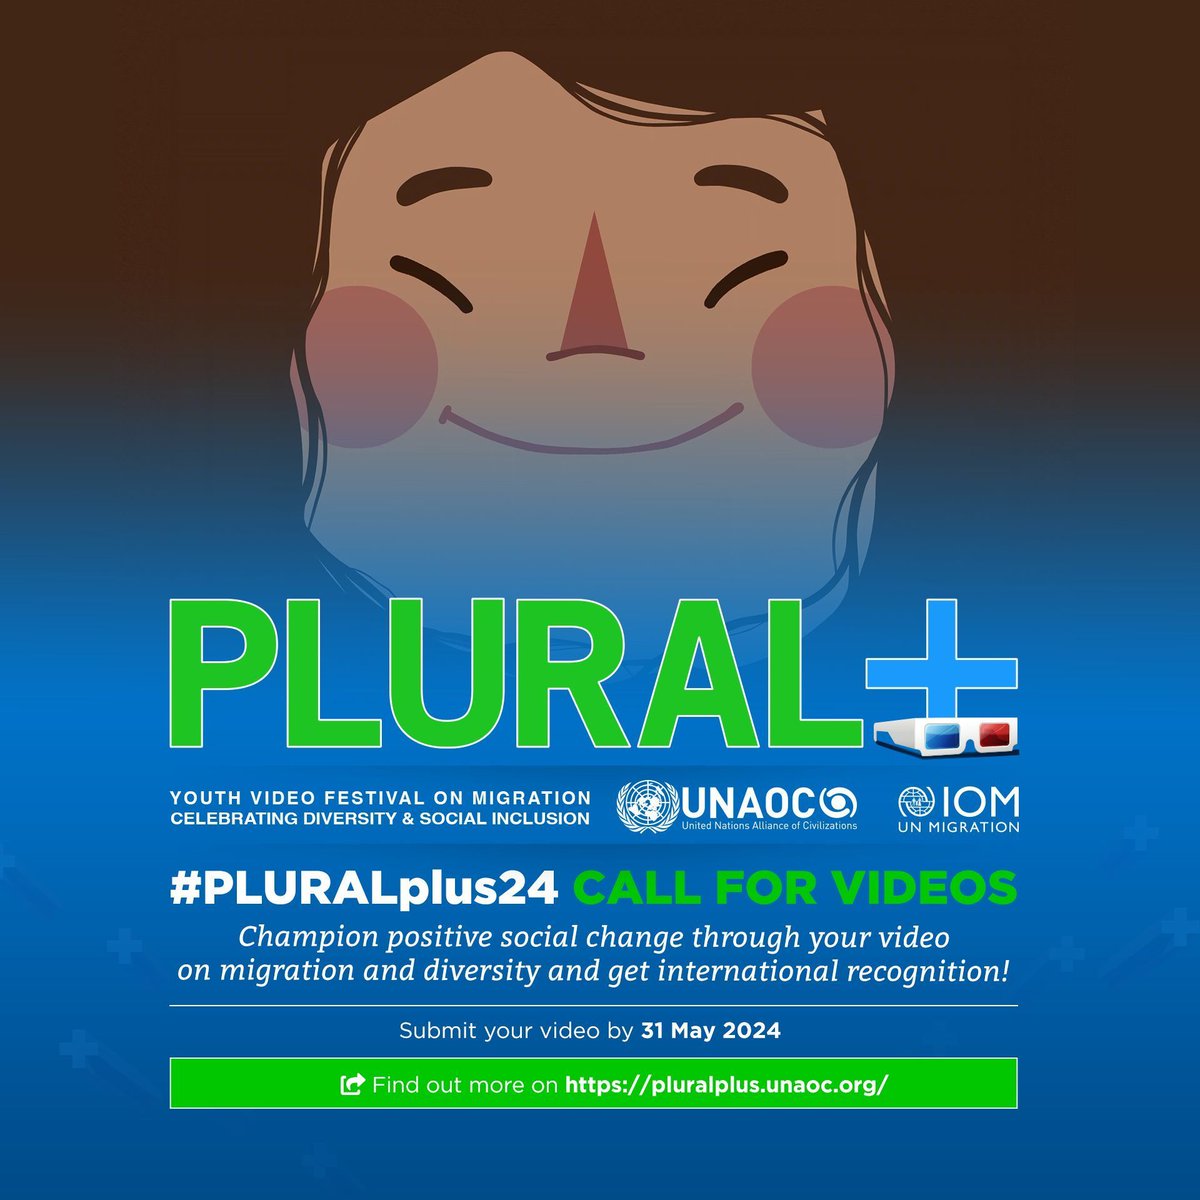 🎥 Filmmakers across all genres have a unique opportunity to change perceptions on urgent topics like #migration, #diversity or #SocialInclusion and create positive social impact.

Submit your short video to the #PLURALplus24 video festival: buff.ly/2HrO4kU